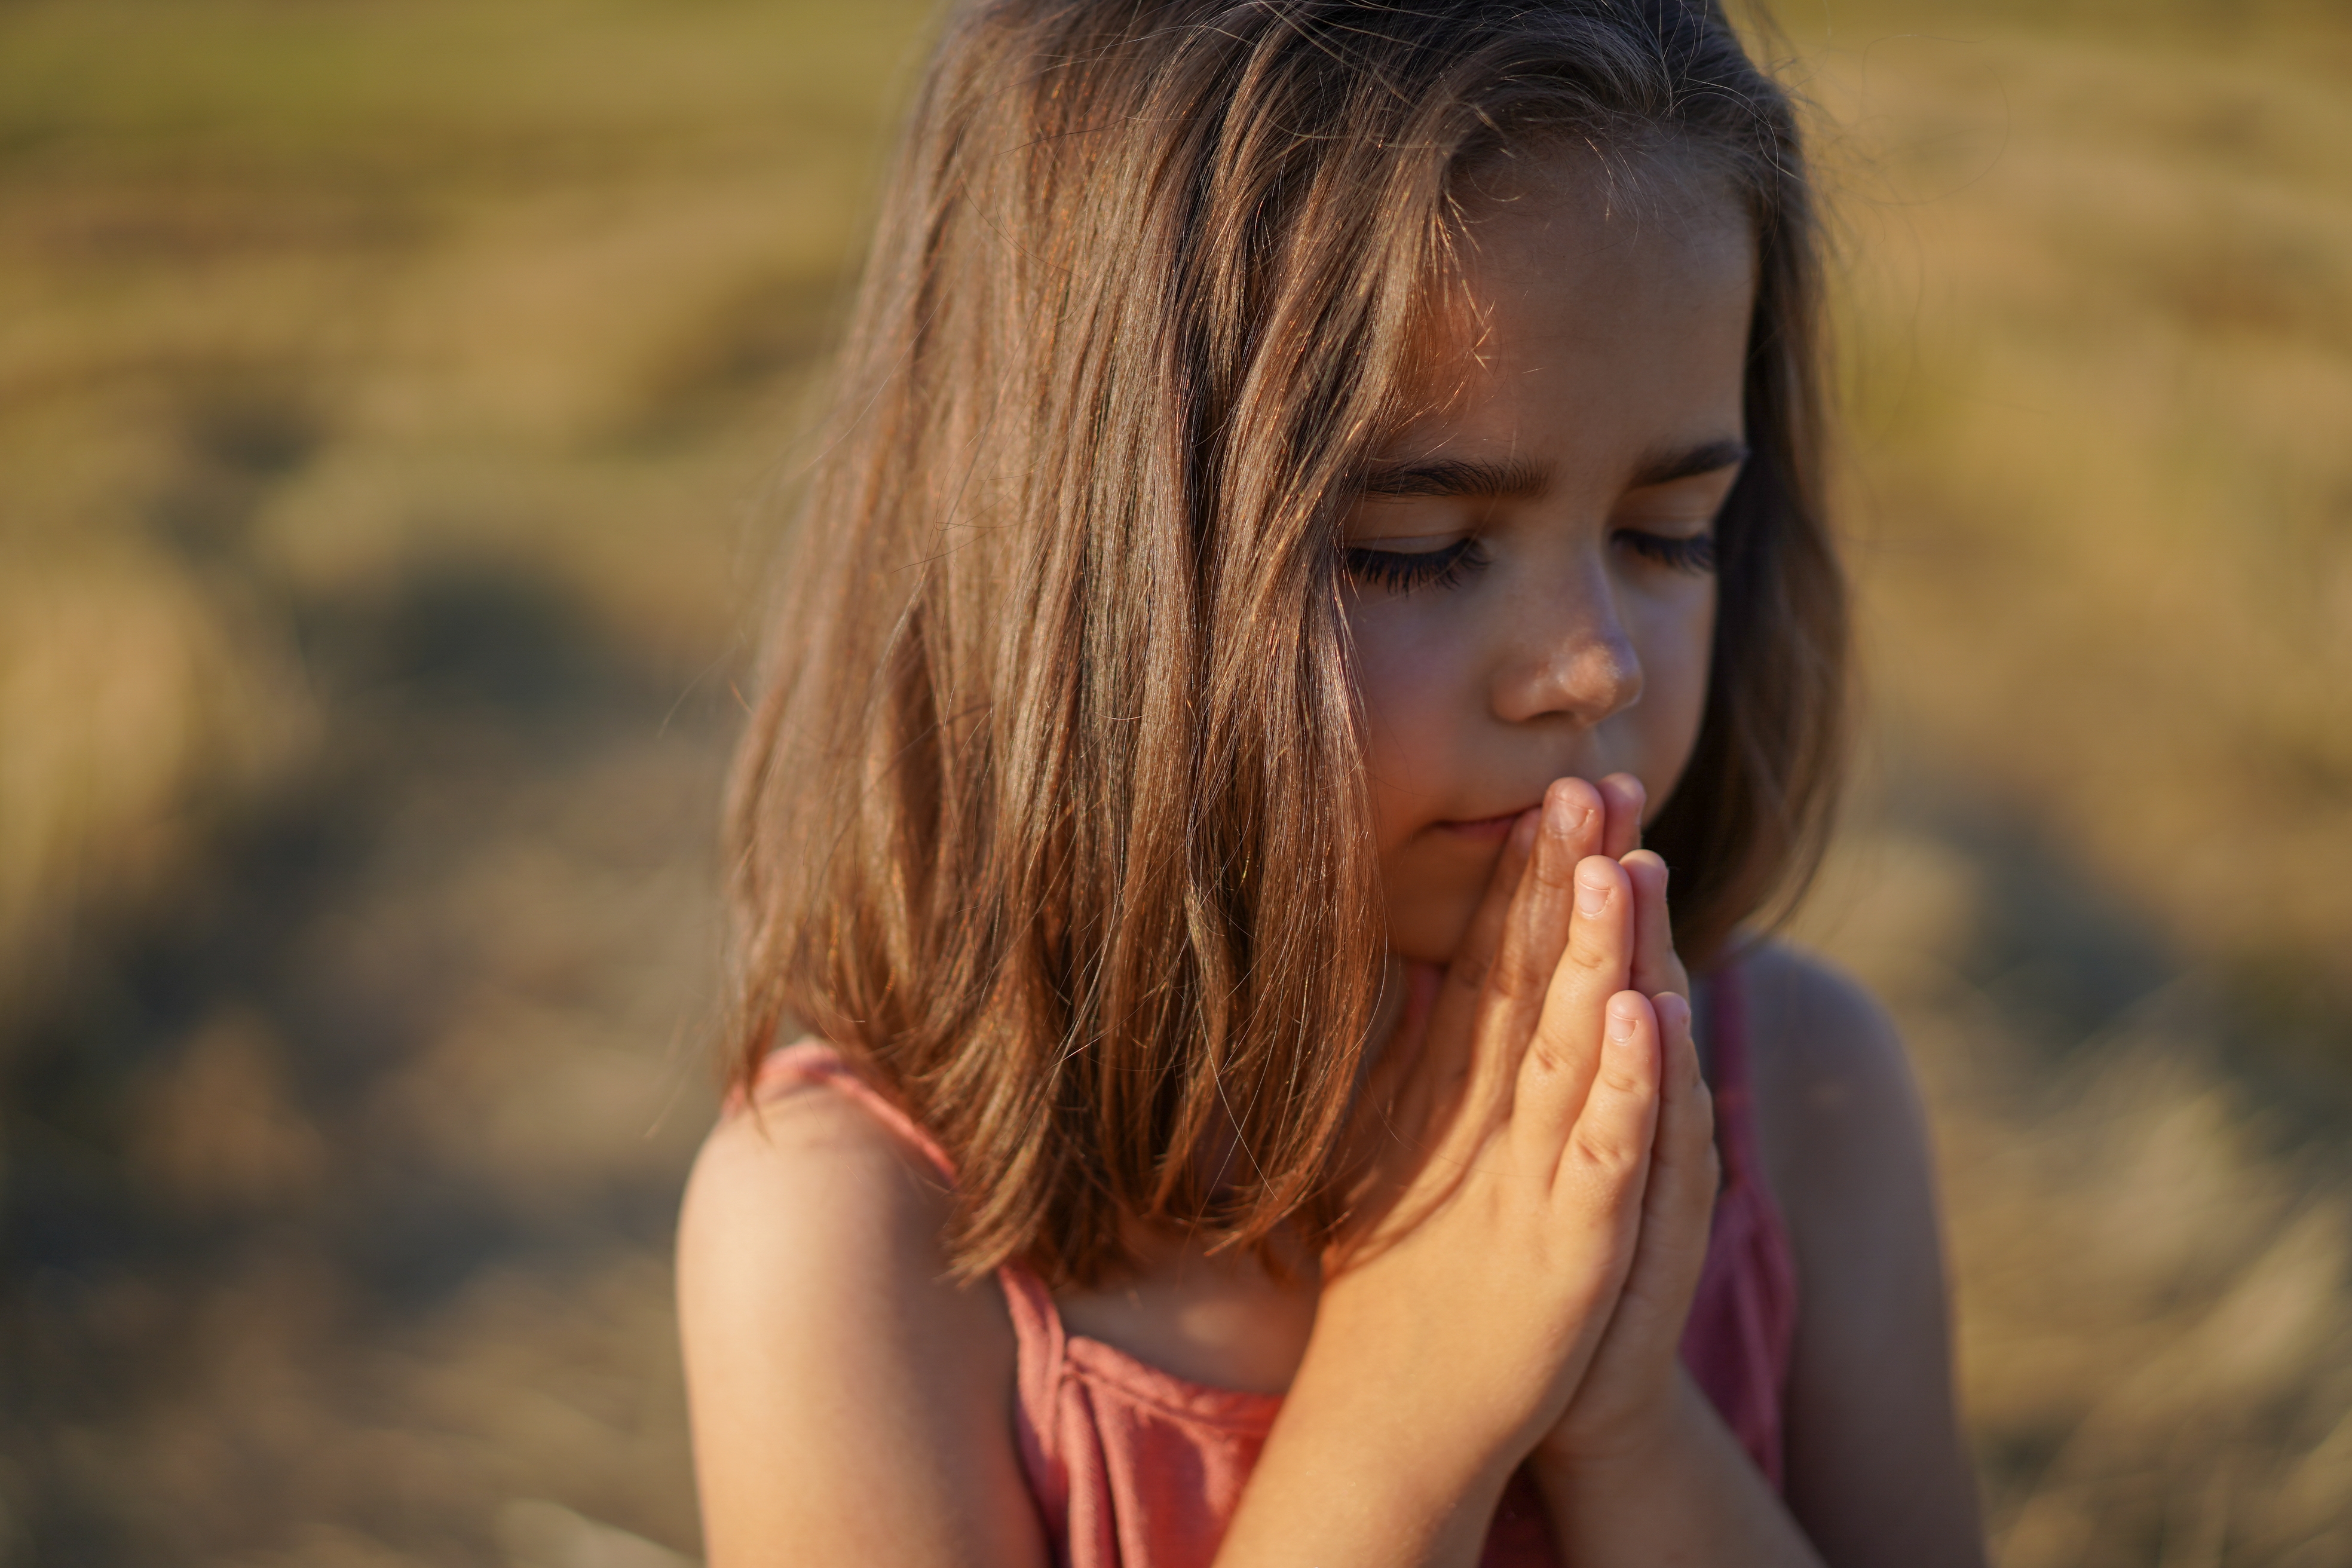 little-girl-closed-her-eyes-praying-in-a-field-h-2021-09-01-13-46-02-utc